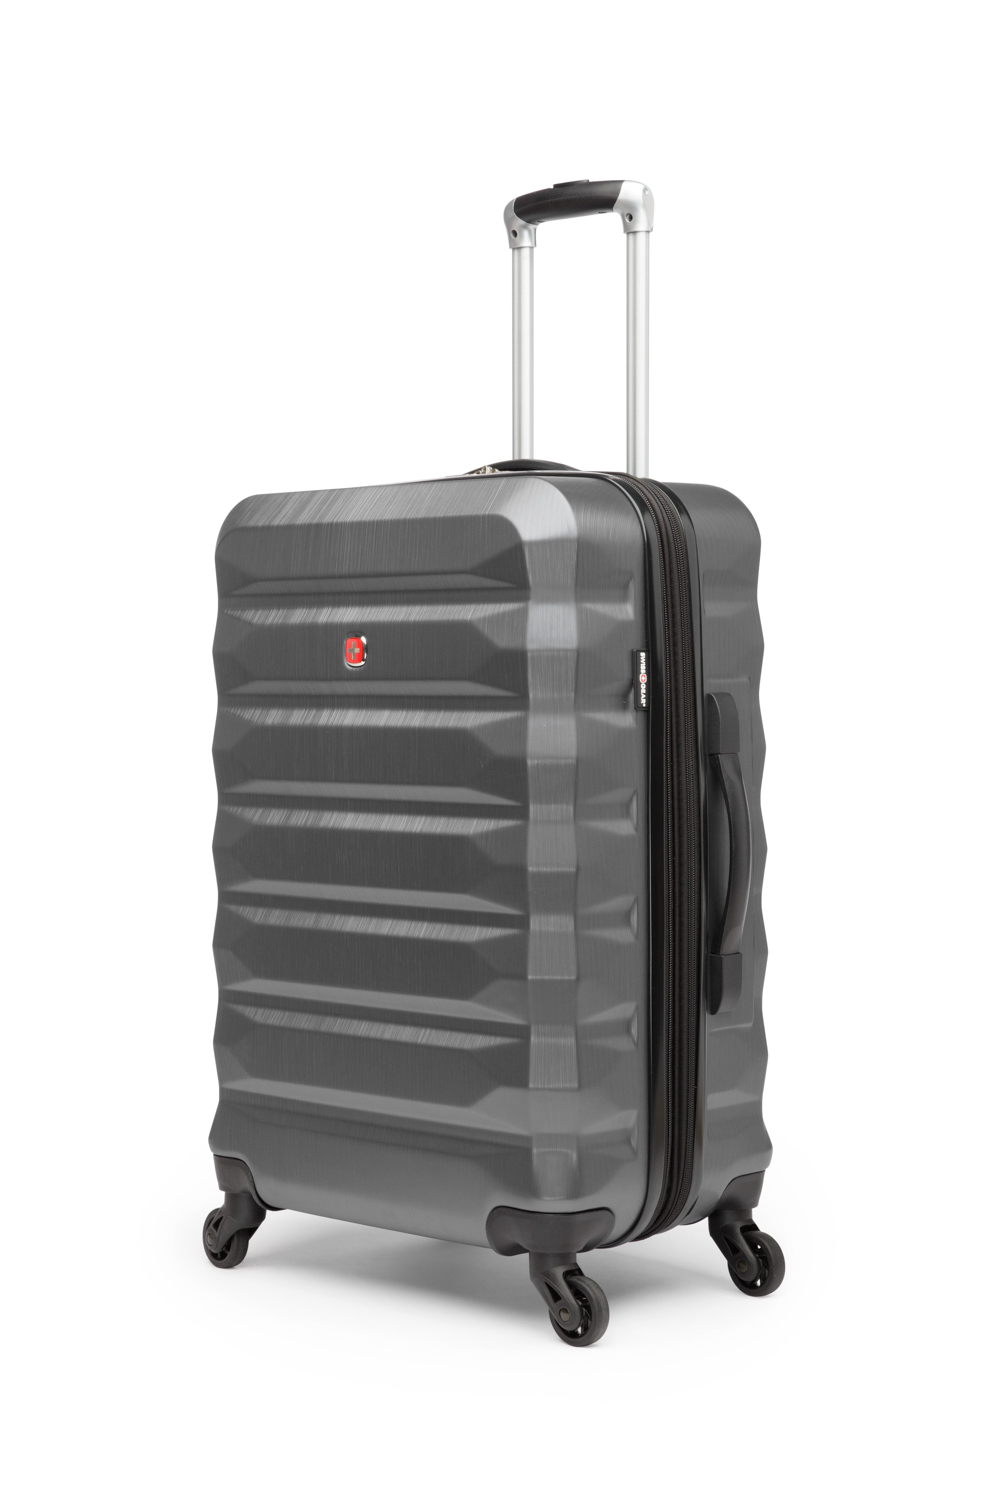 Canada 24 inch Charcoal Lightweight Hard Side Wheeled Suitcase